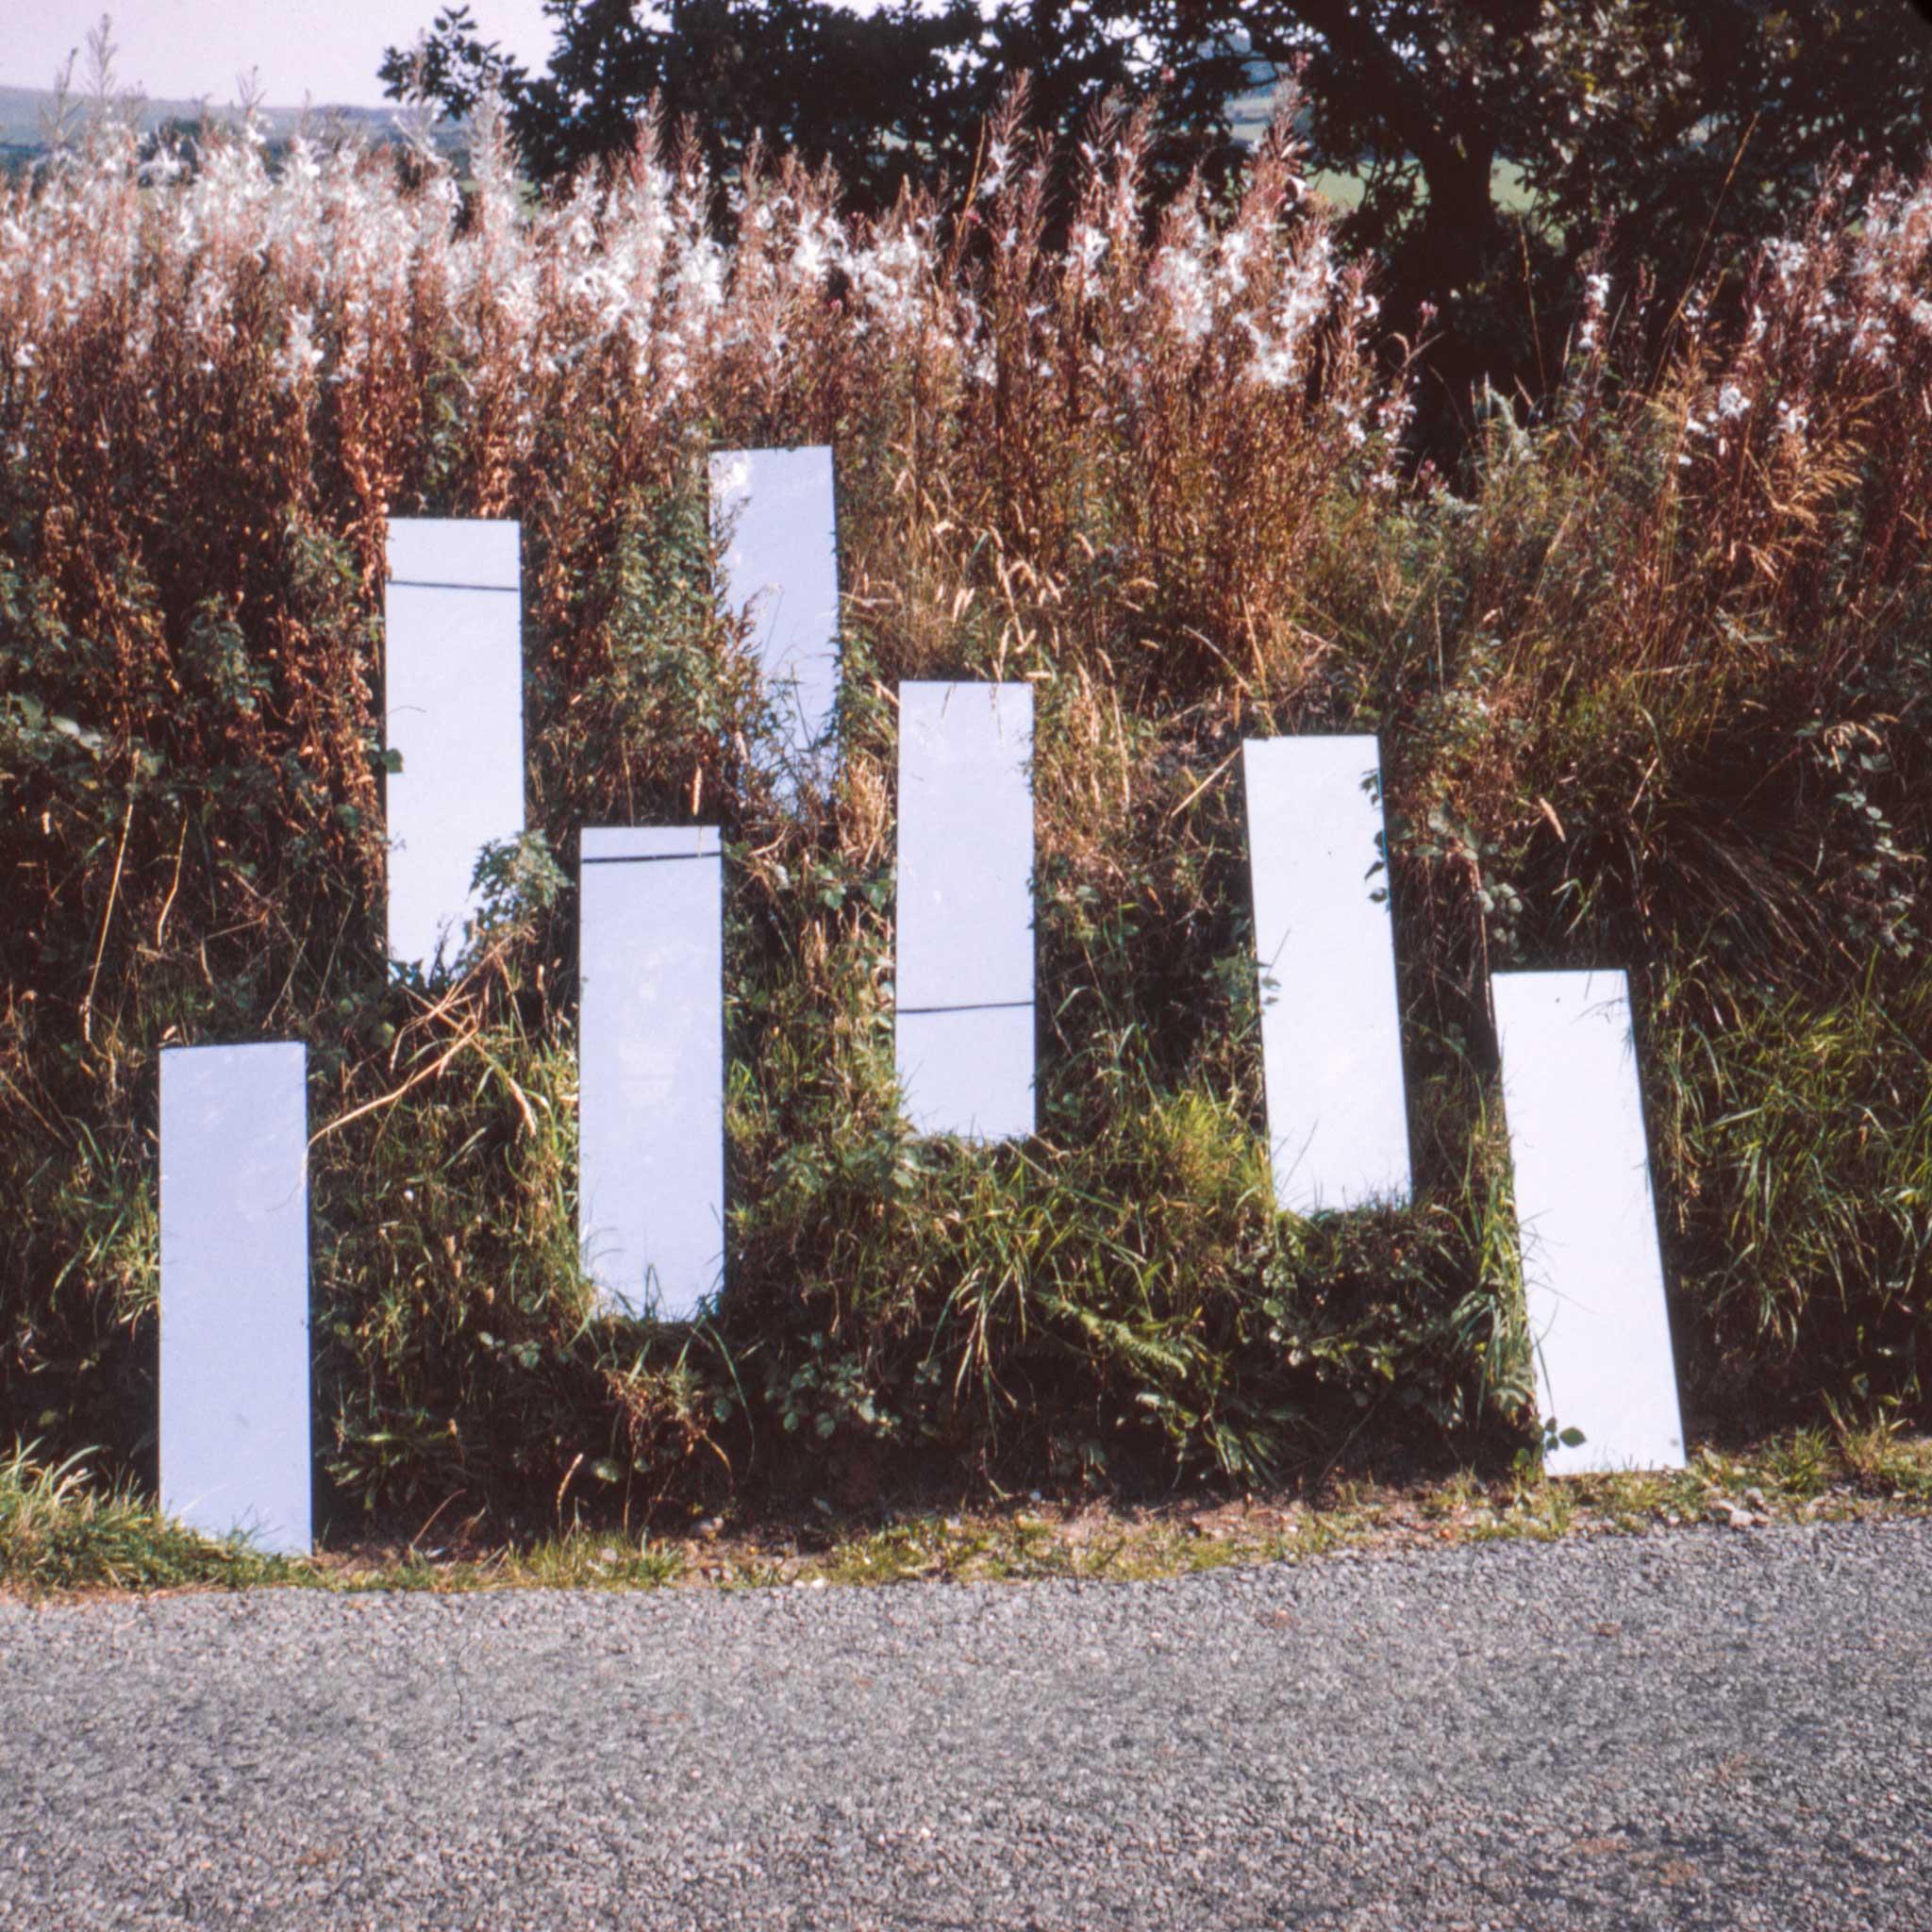 Seven mirrors in the shape of vertical rectangles are positioned on a grassy hillside